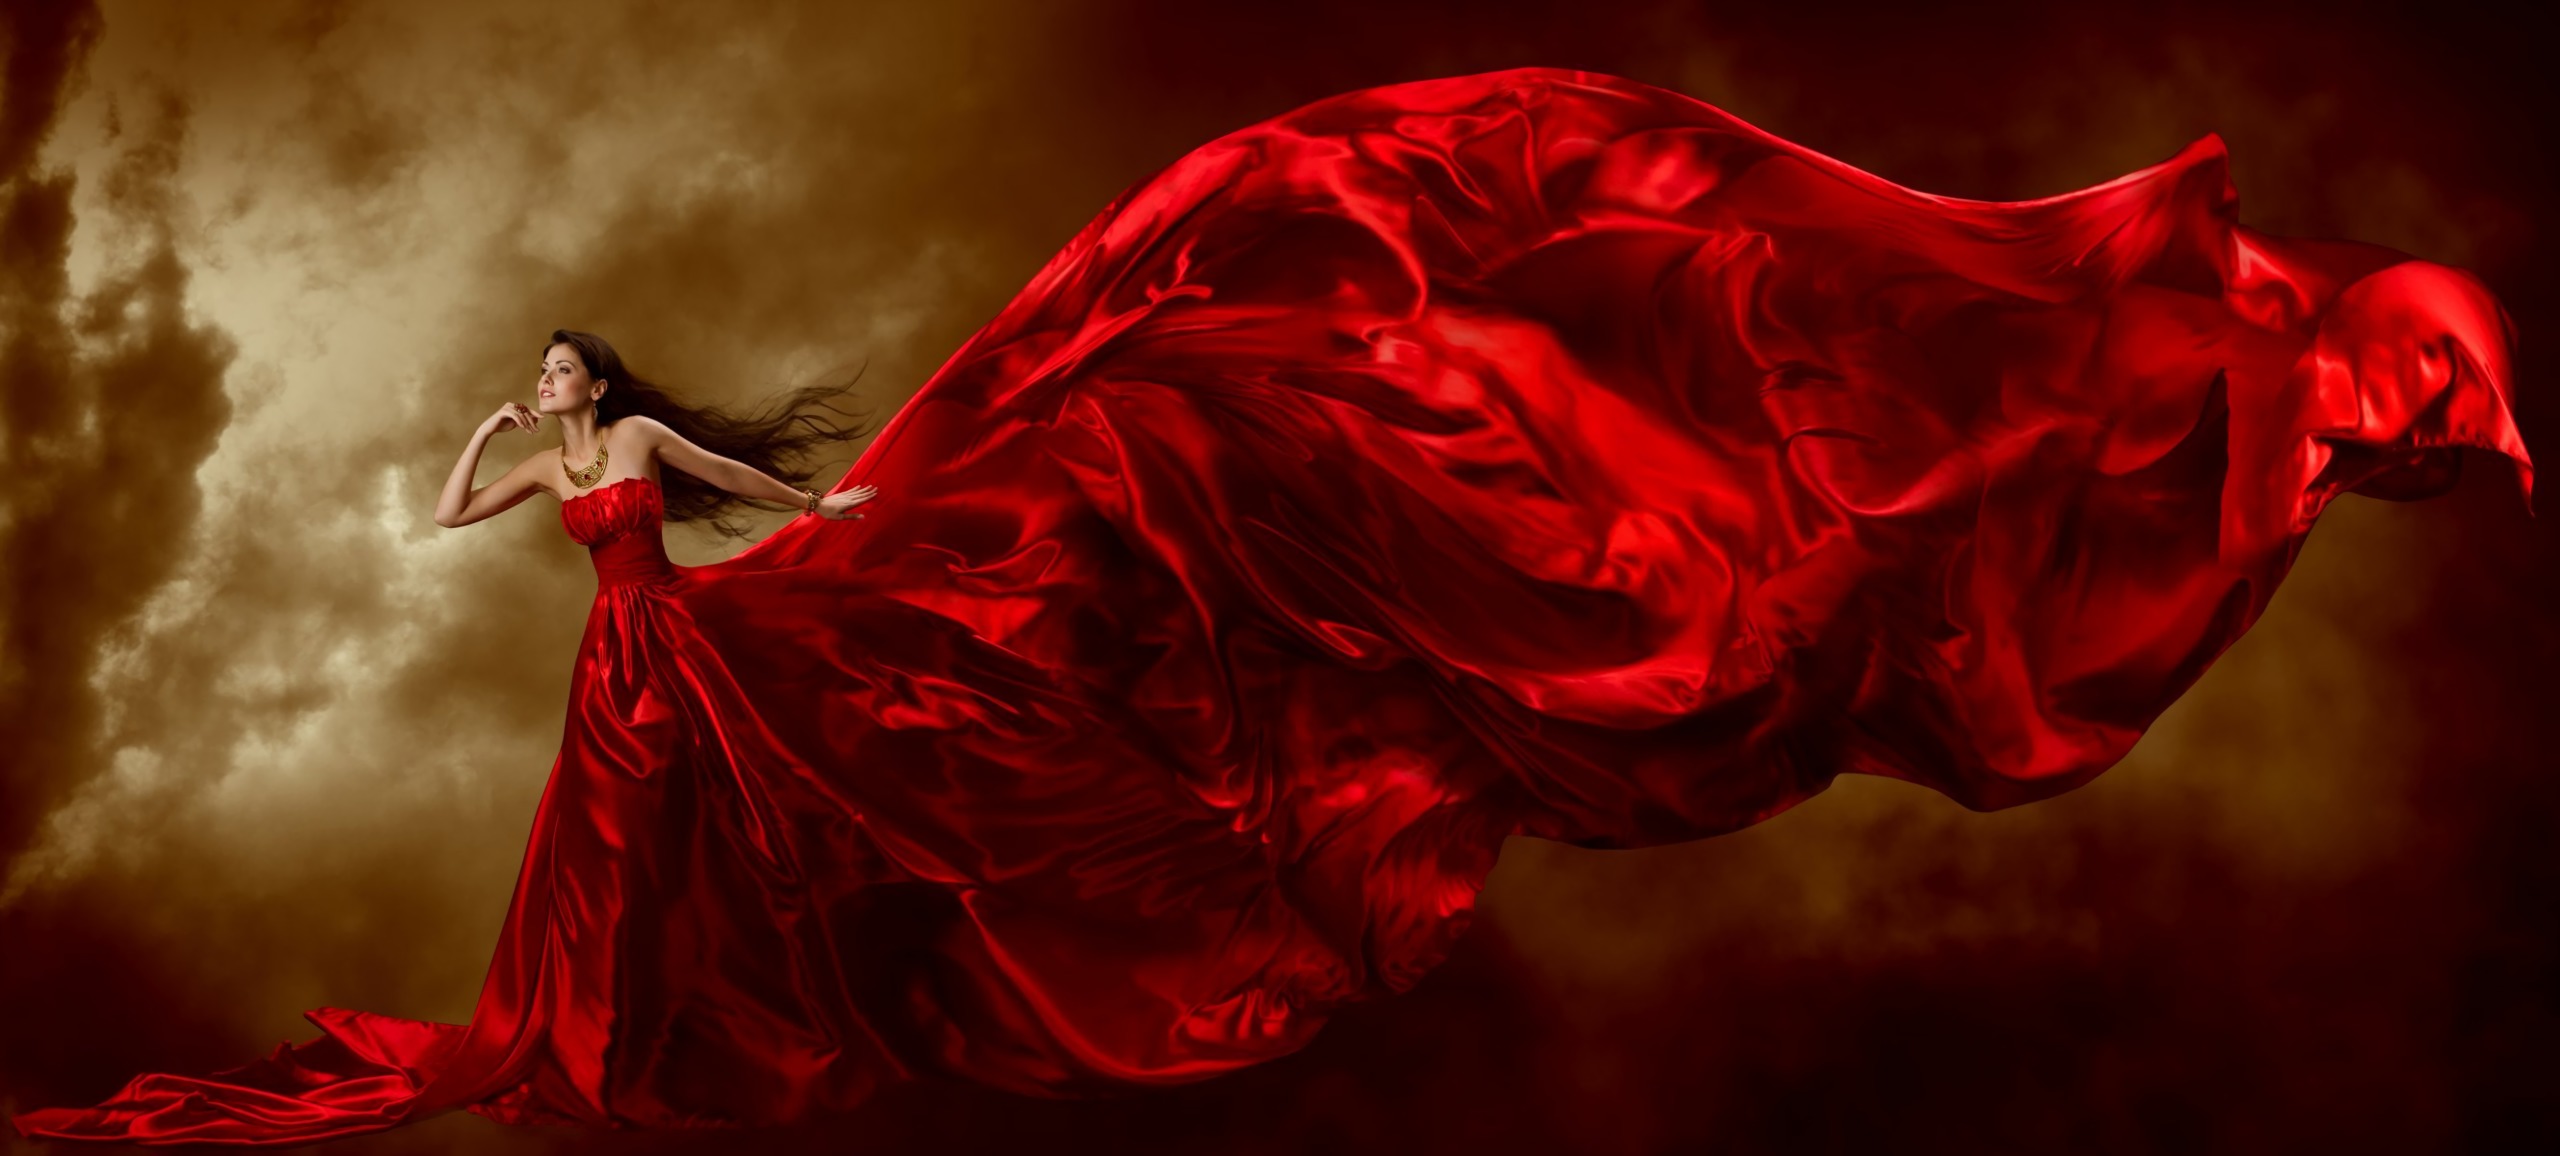 Girl in Long Red Dress HD Wallpaper | Background Image ...